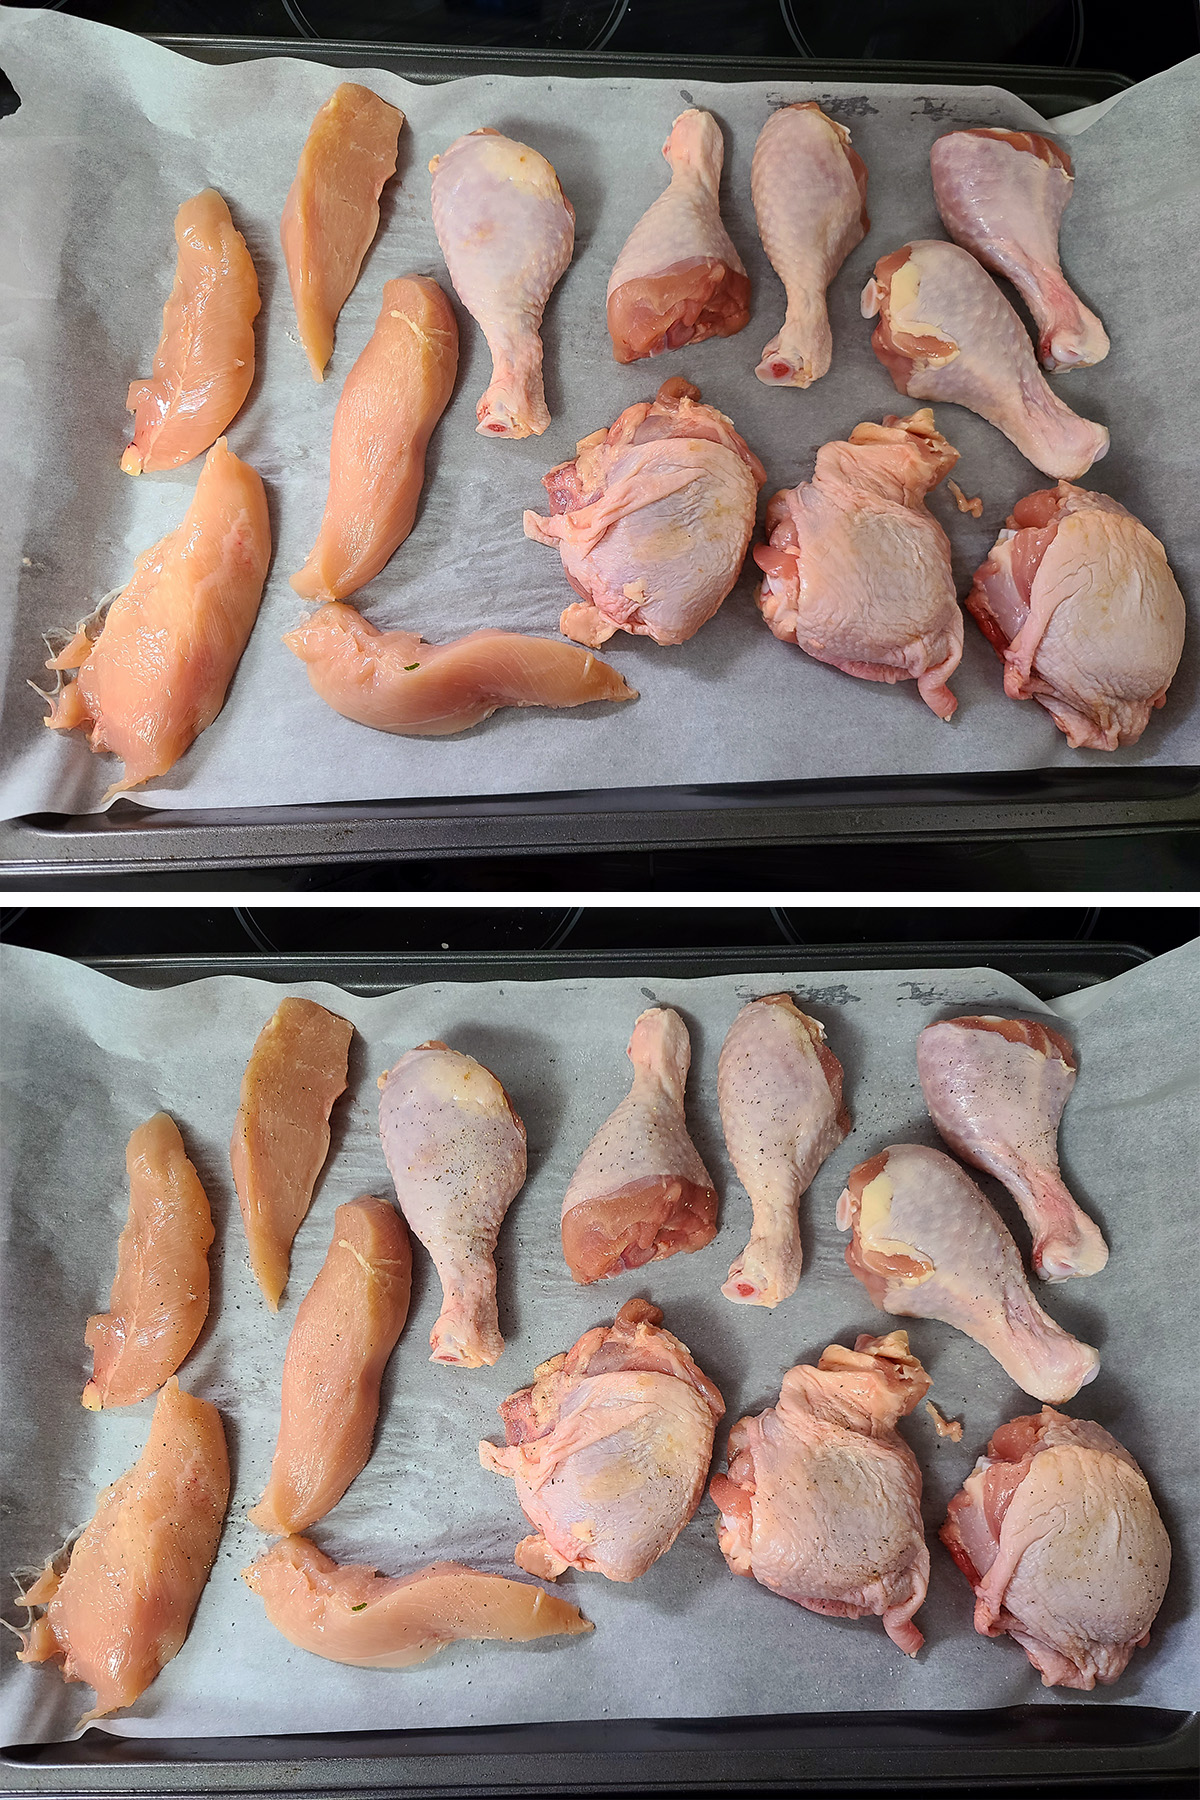 Chicken pieces resting on a parchment lined baking sheet.